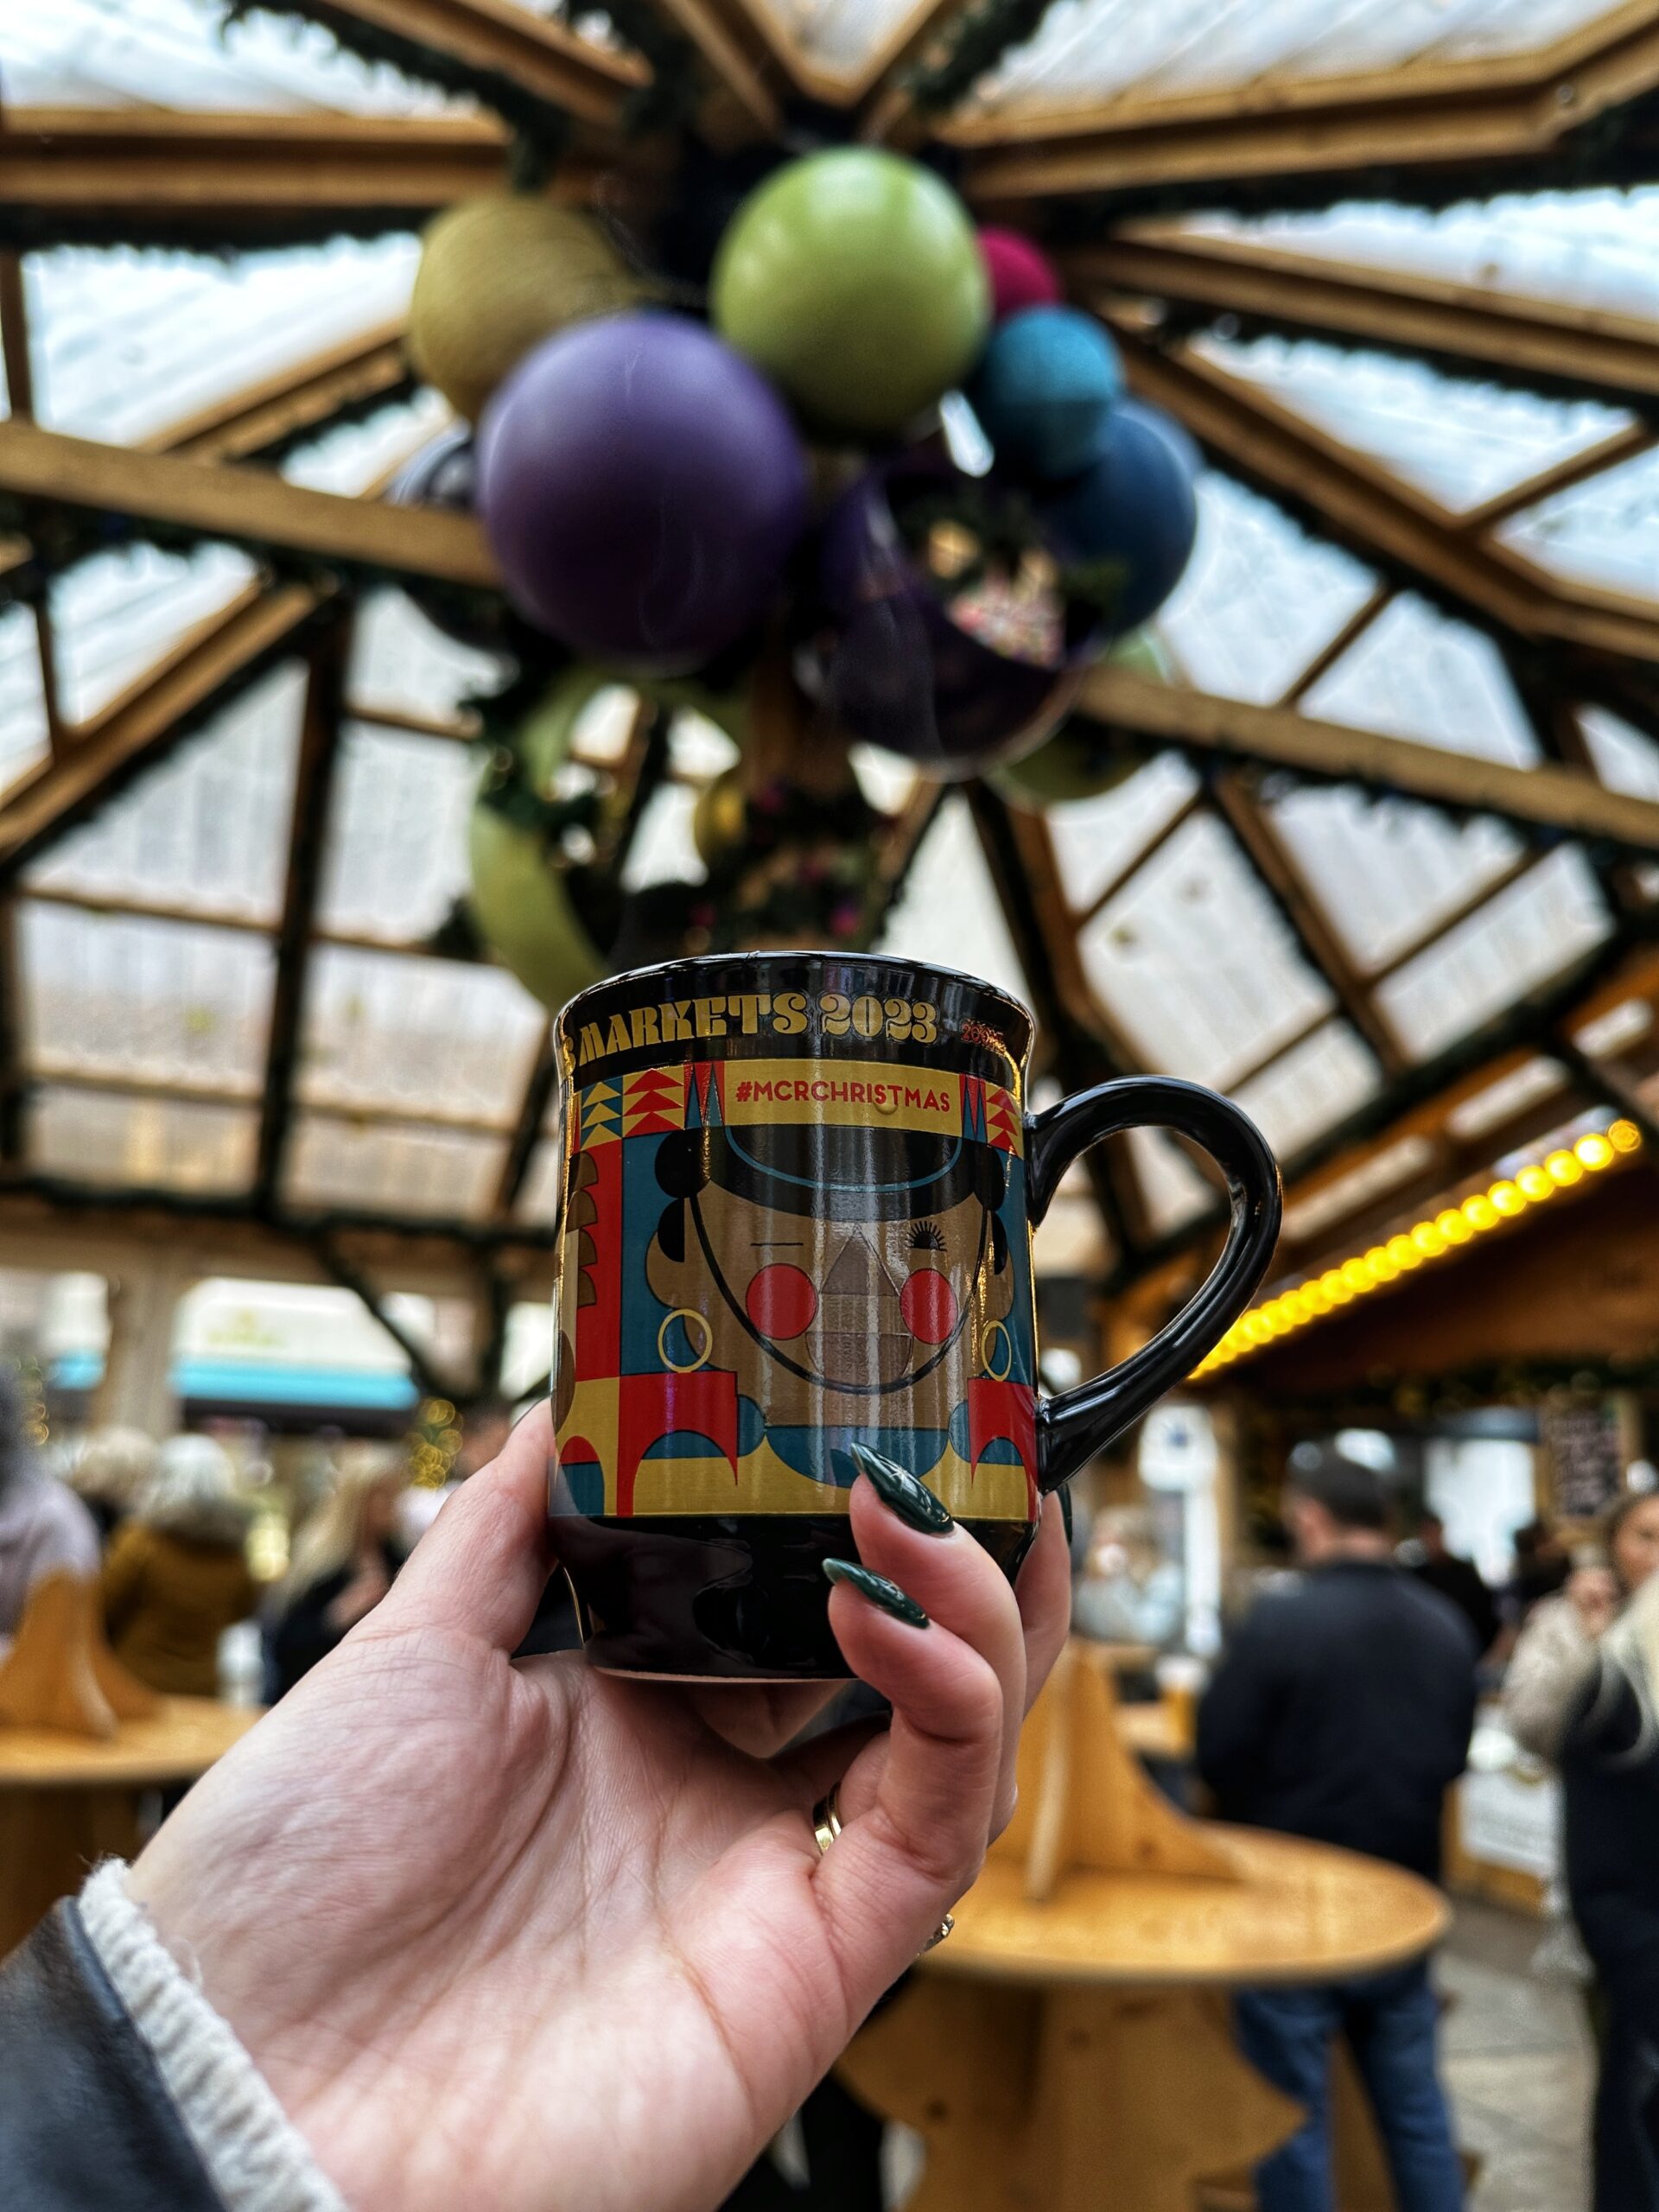 Gluhwein, or mulled wine, at the Manchester Christmas Markets 2023.